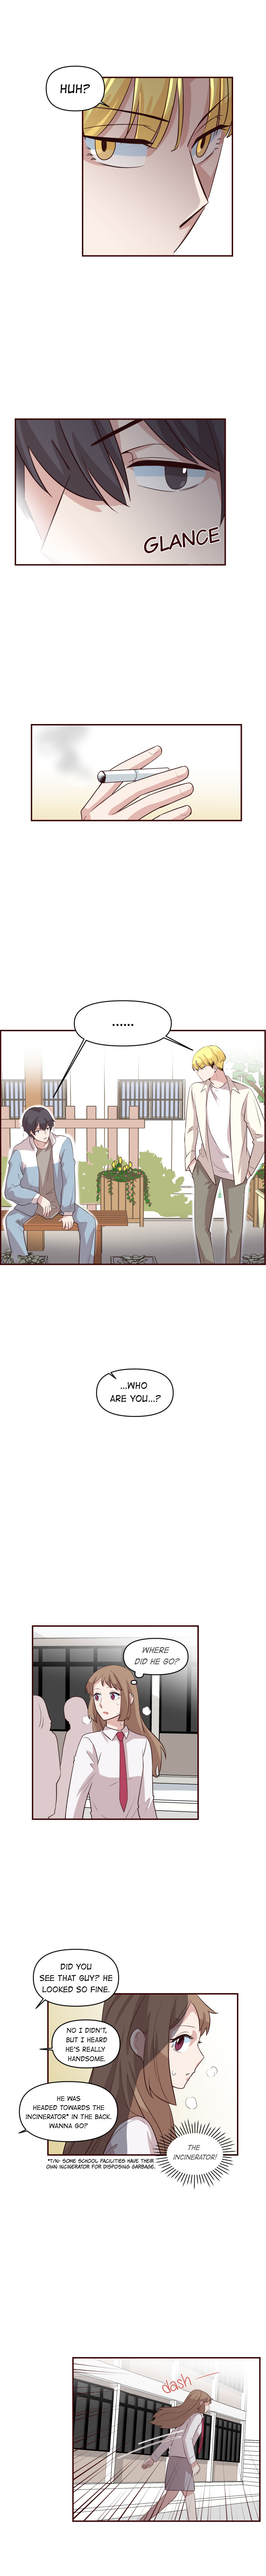 The Housewife Vol. 1 Ch. 22